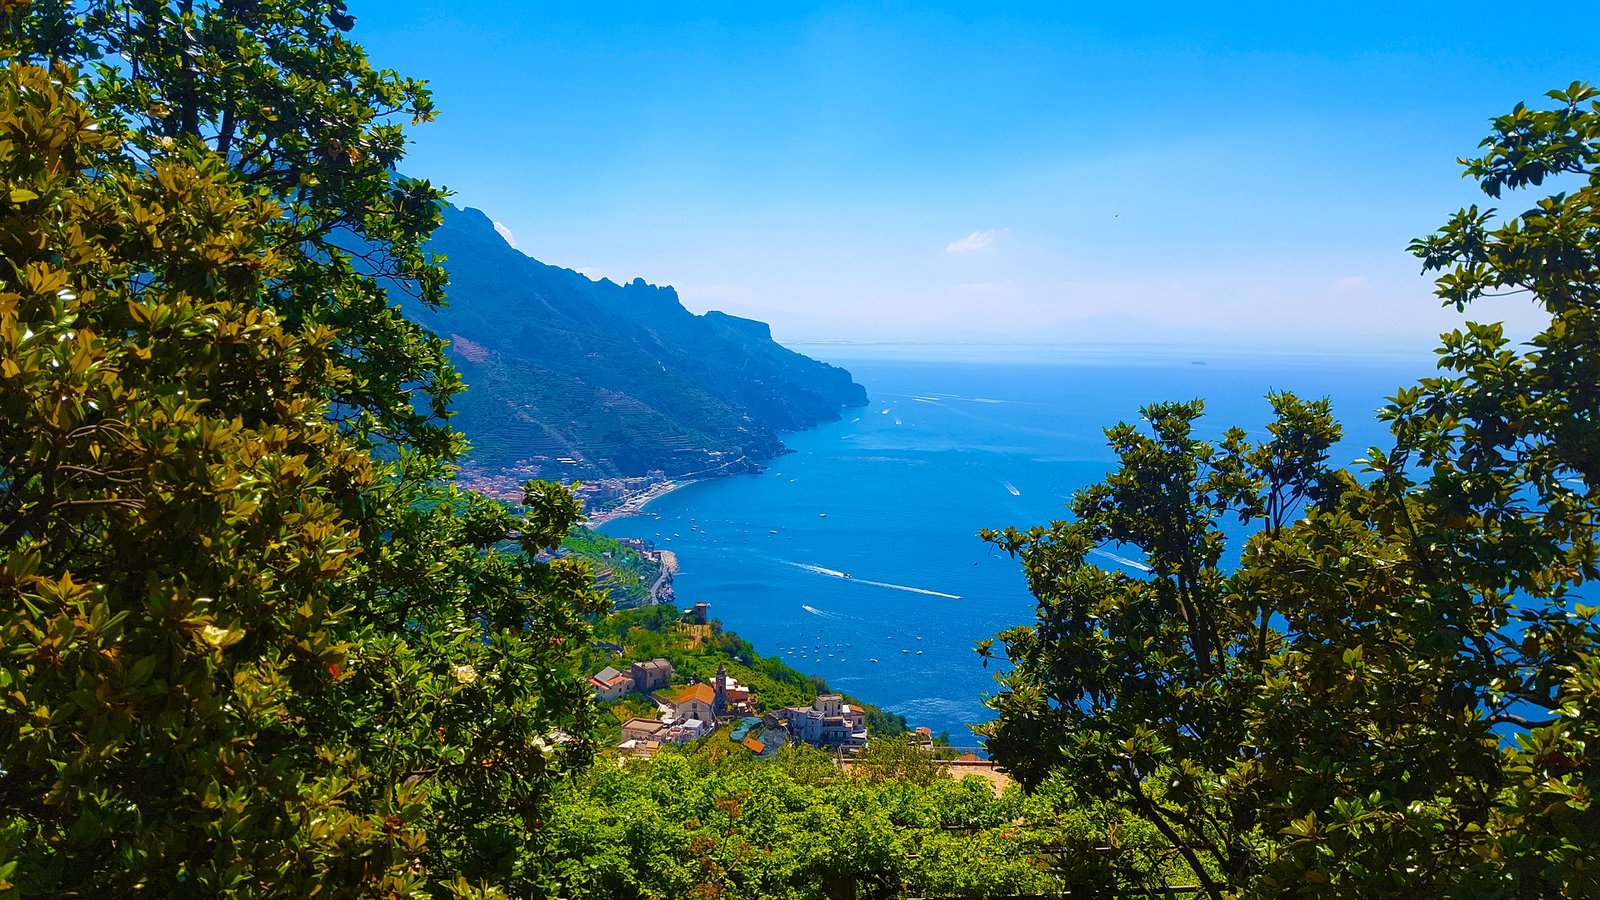 Enjoy a Stress-Free Journey from Naples to Positano with a Private Transfer